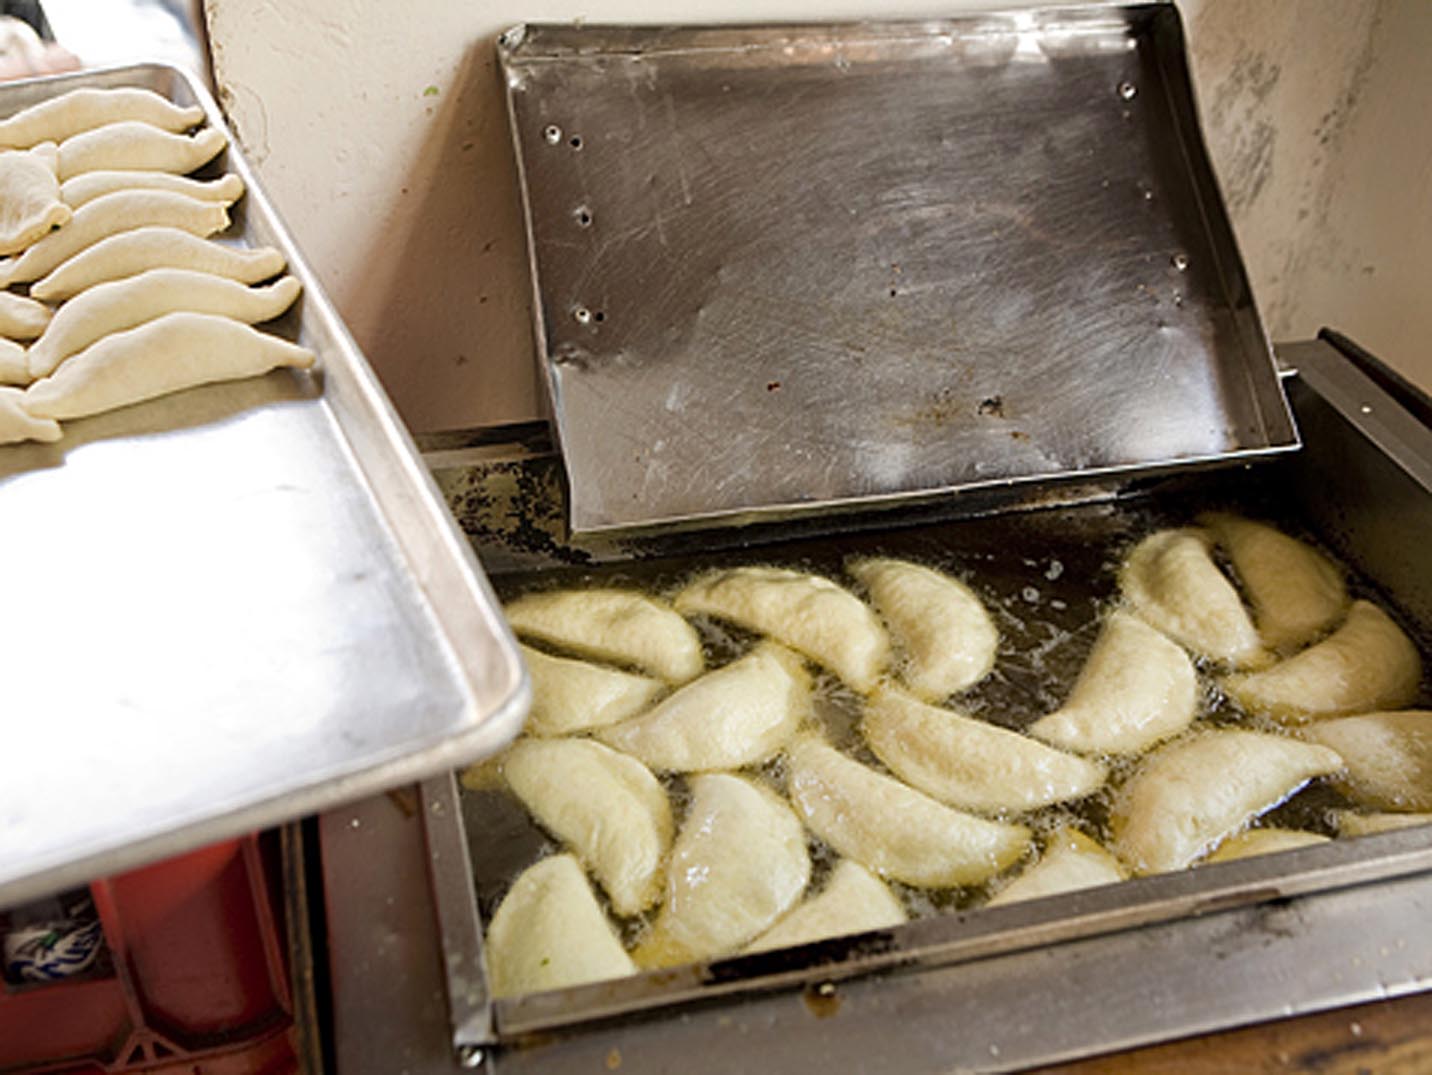 A fryer filled with empanadas from Doña Maria’s in Barichara, Colombia.